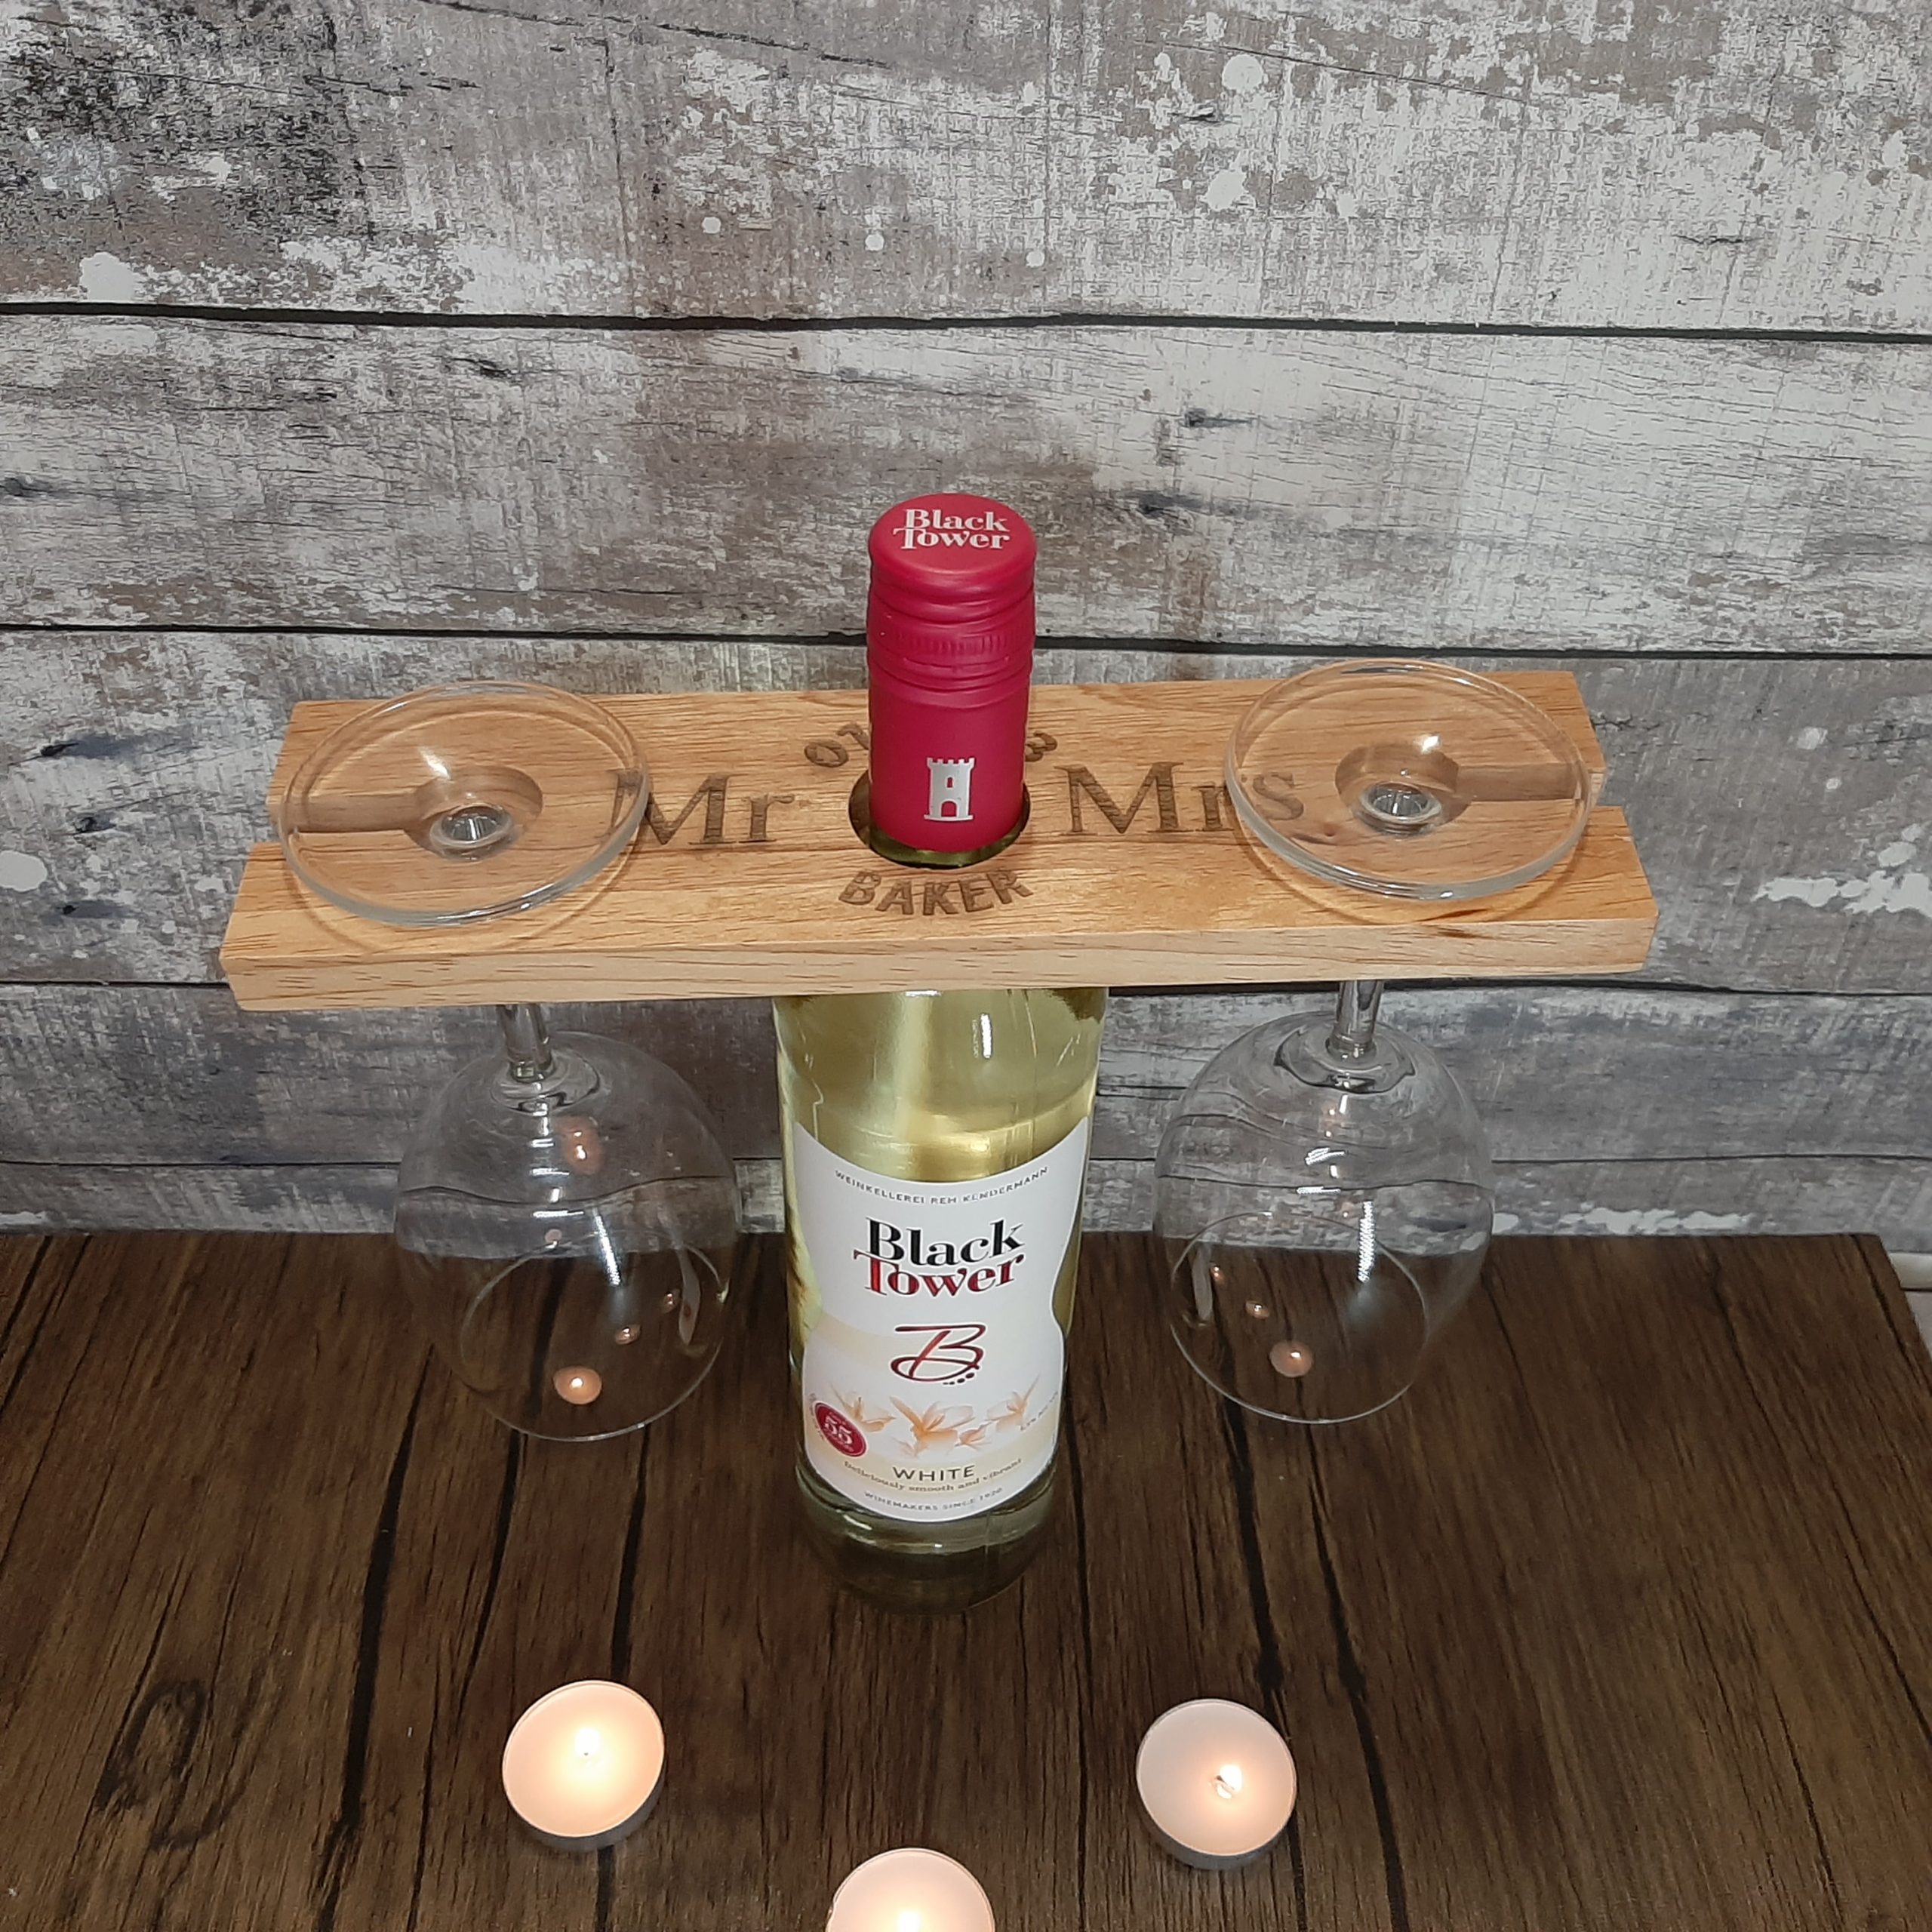 Laser Engraved Wine Glass Holder with hanging glasses on a bottle of wine at an angle to see the personalised Mr & Mrs wedding anniversary details